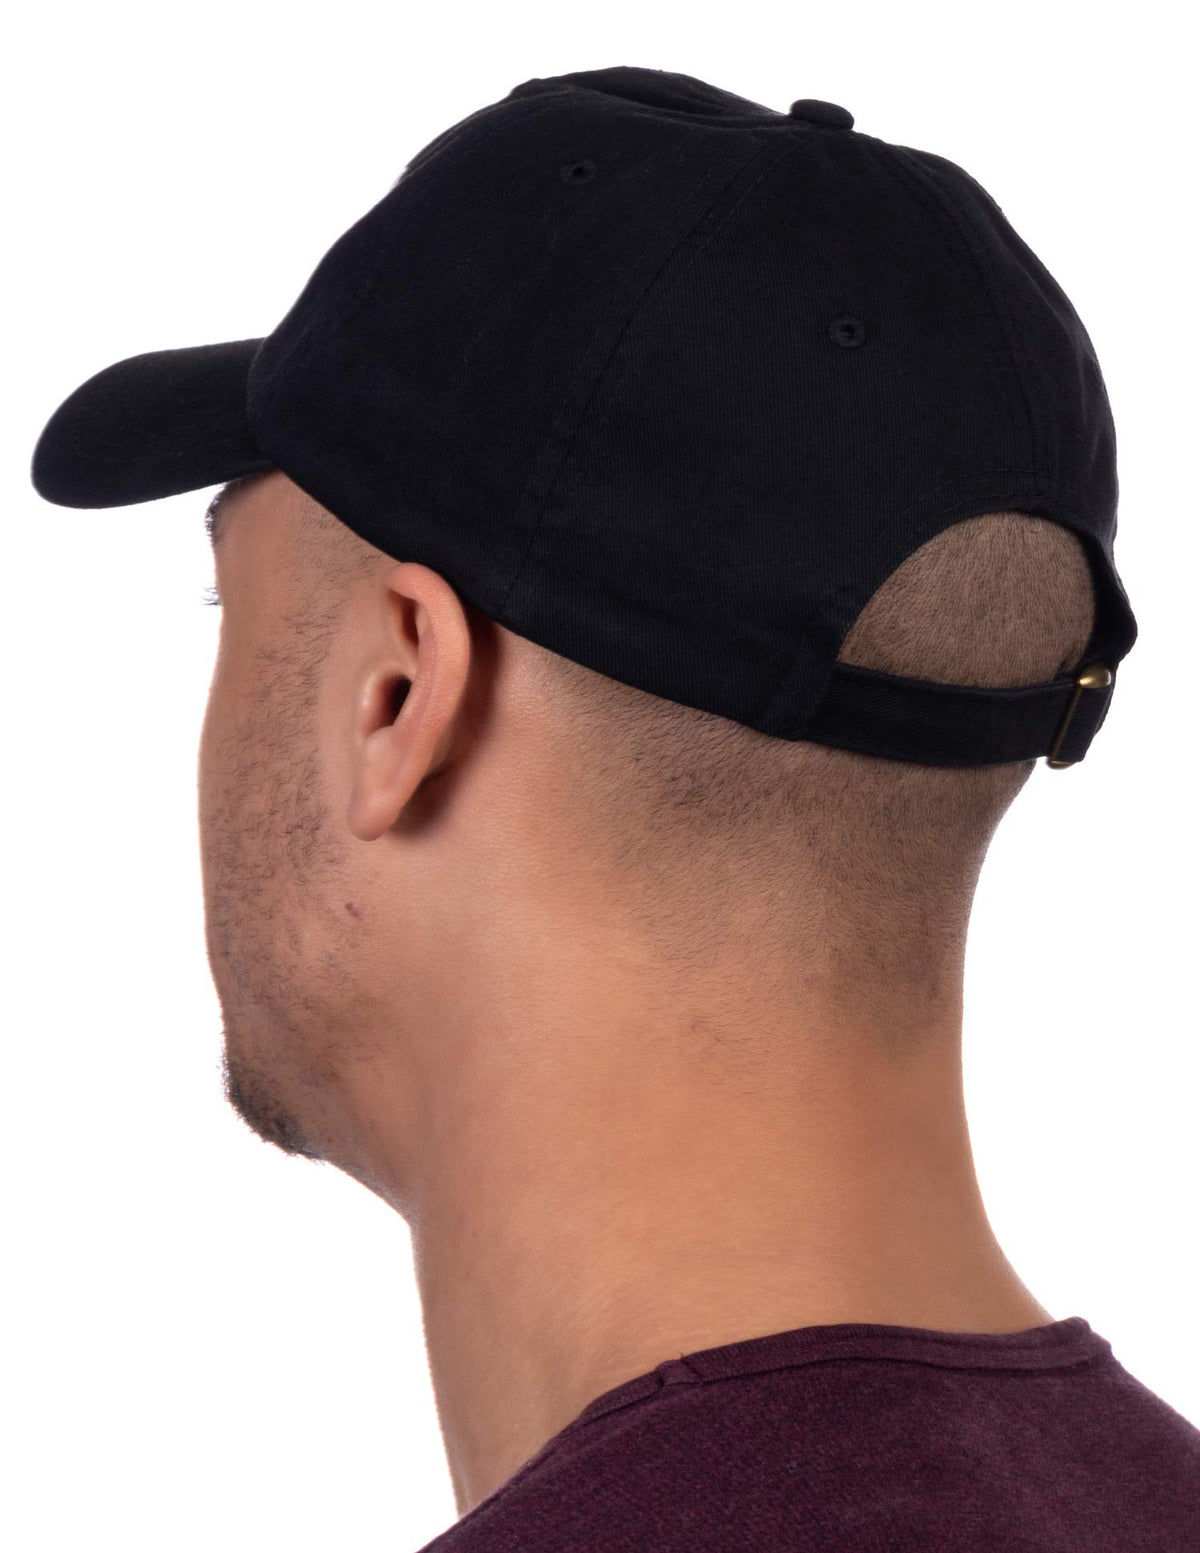 Men's Hats and Caps - Military Shopping